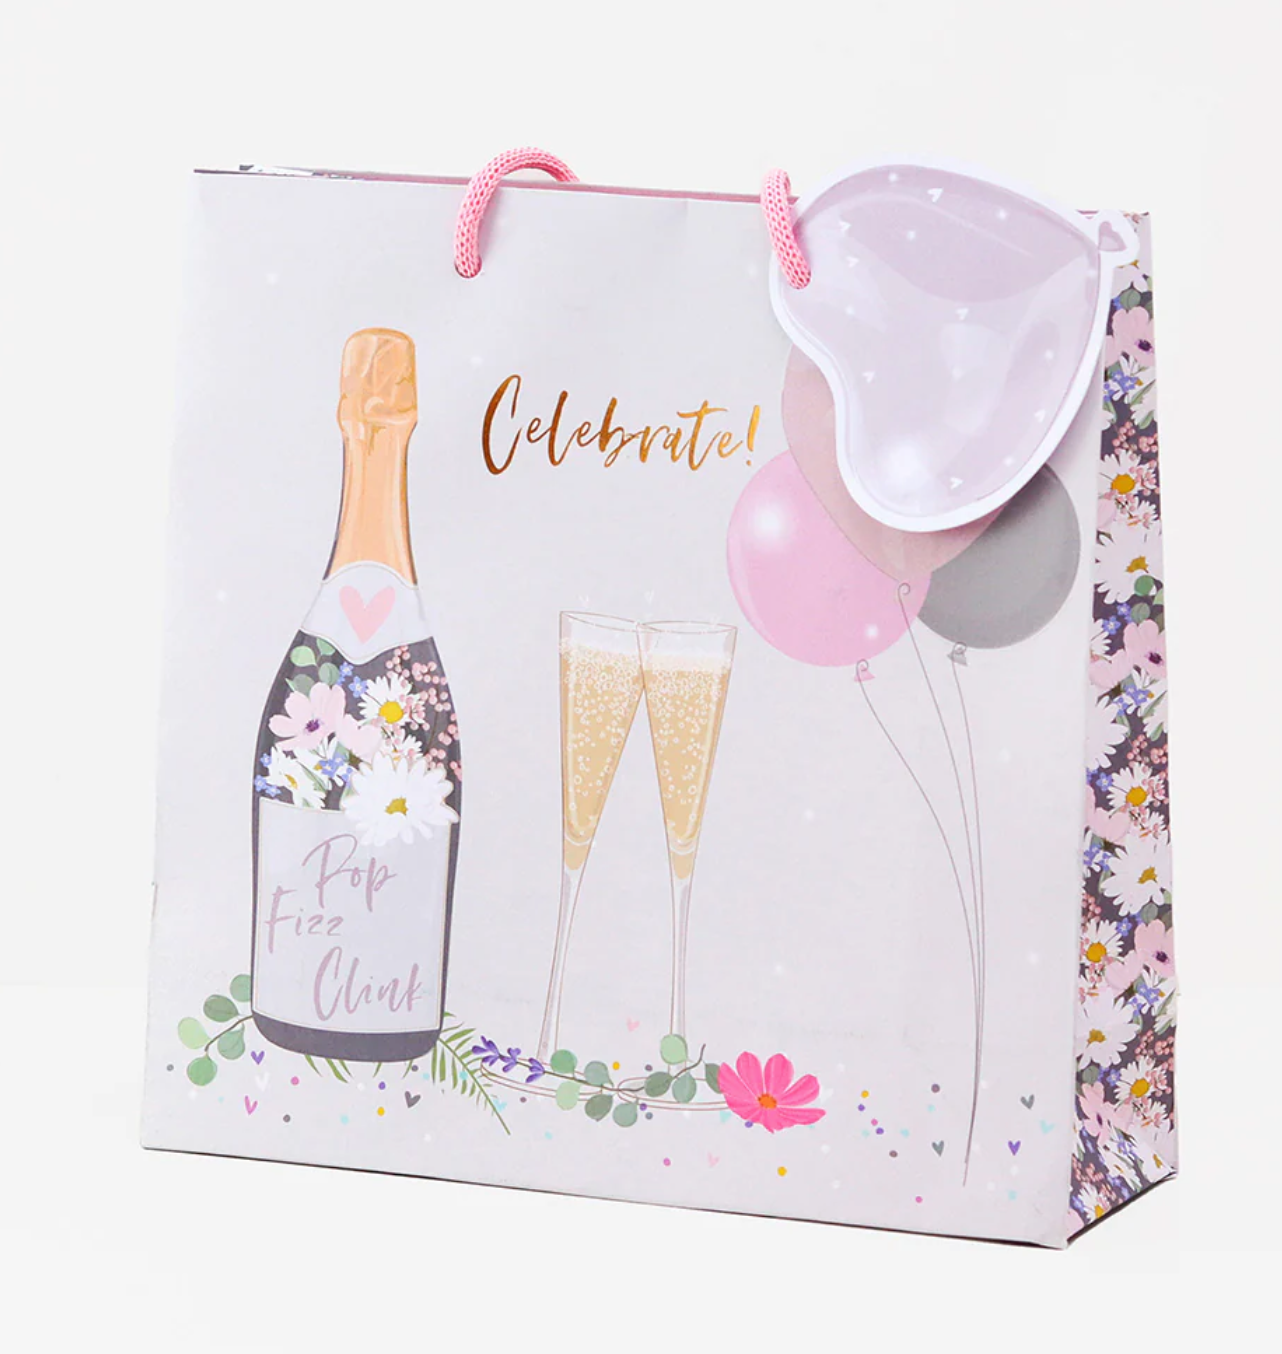 Belly Button Champagne Glasses 'Celebrate' Gift Bag -Medium